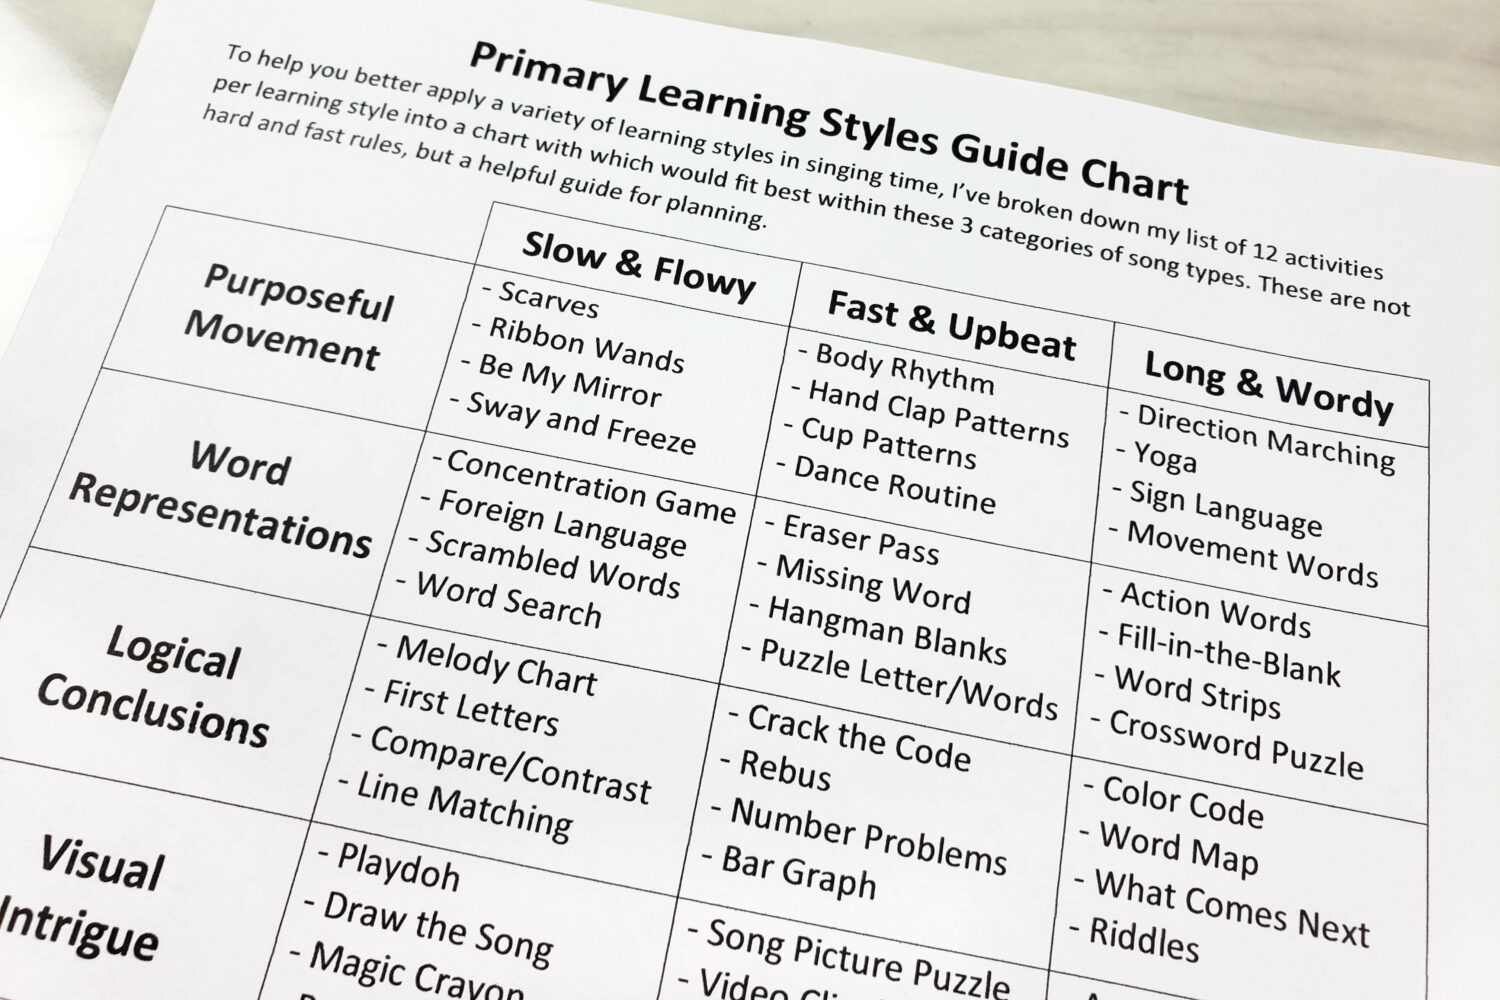 Primary learning Styles by Song Type Chart for easy singing time planning with ideas for LDS Primary Music Leaders